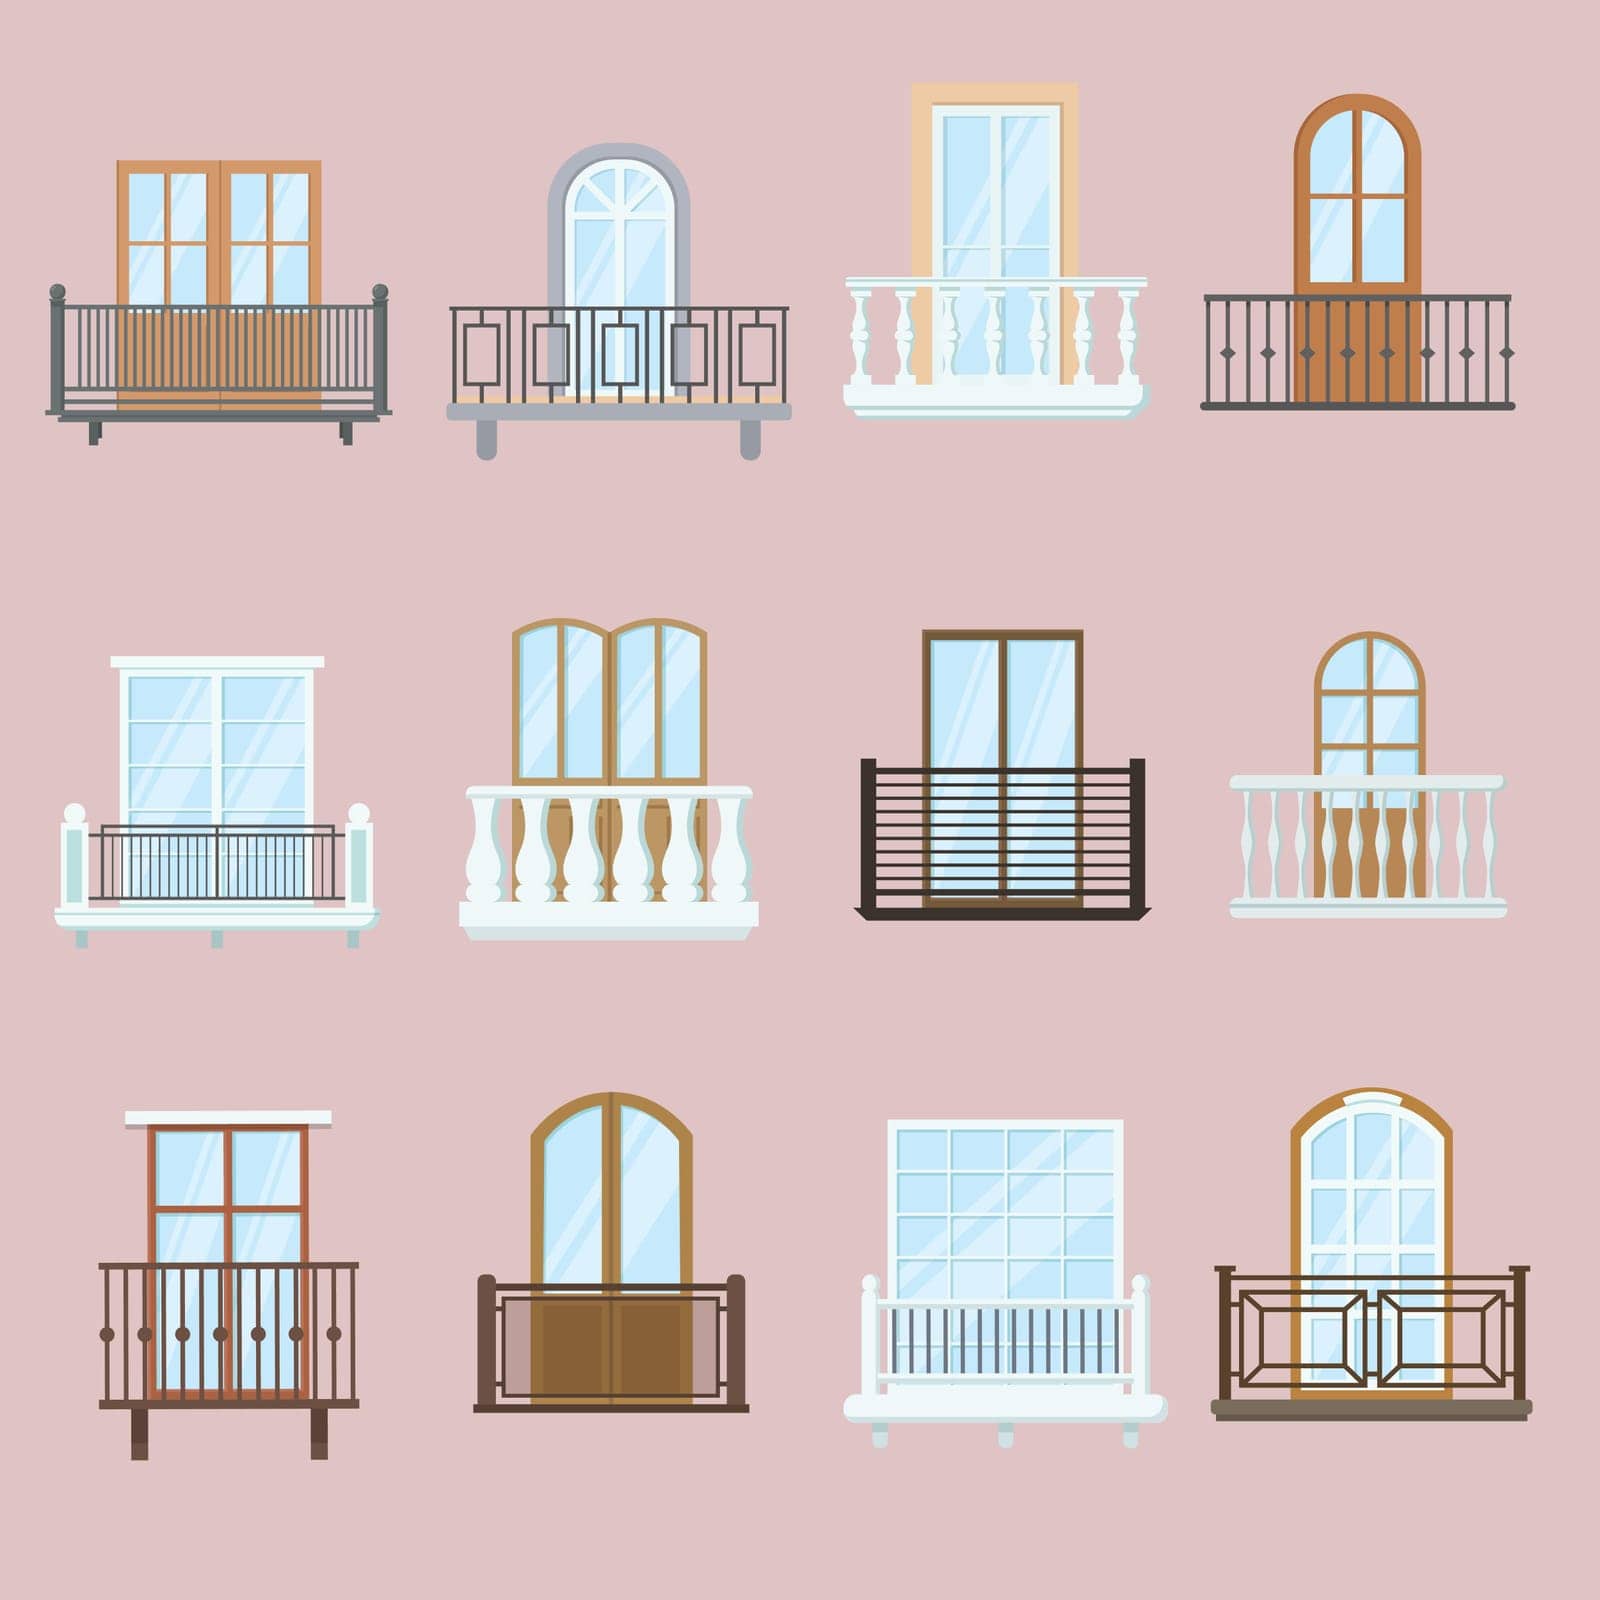 Windows and balconies set by pchvector